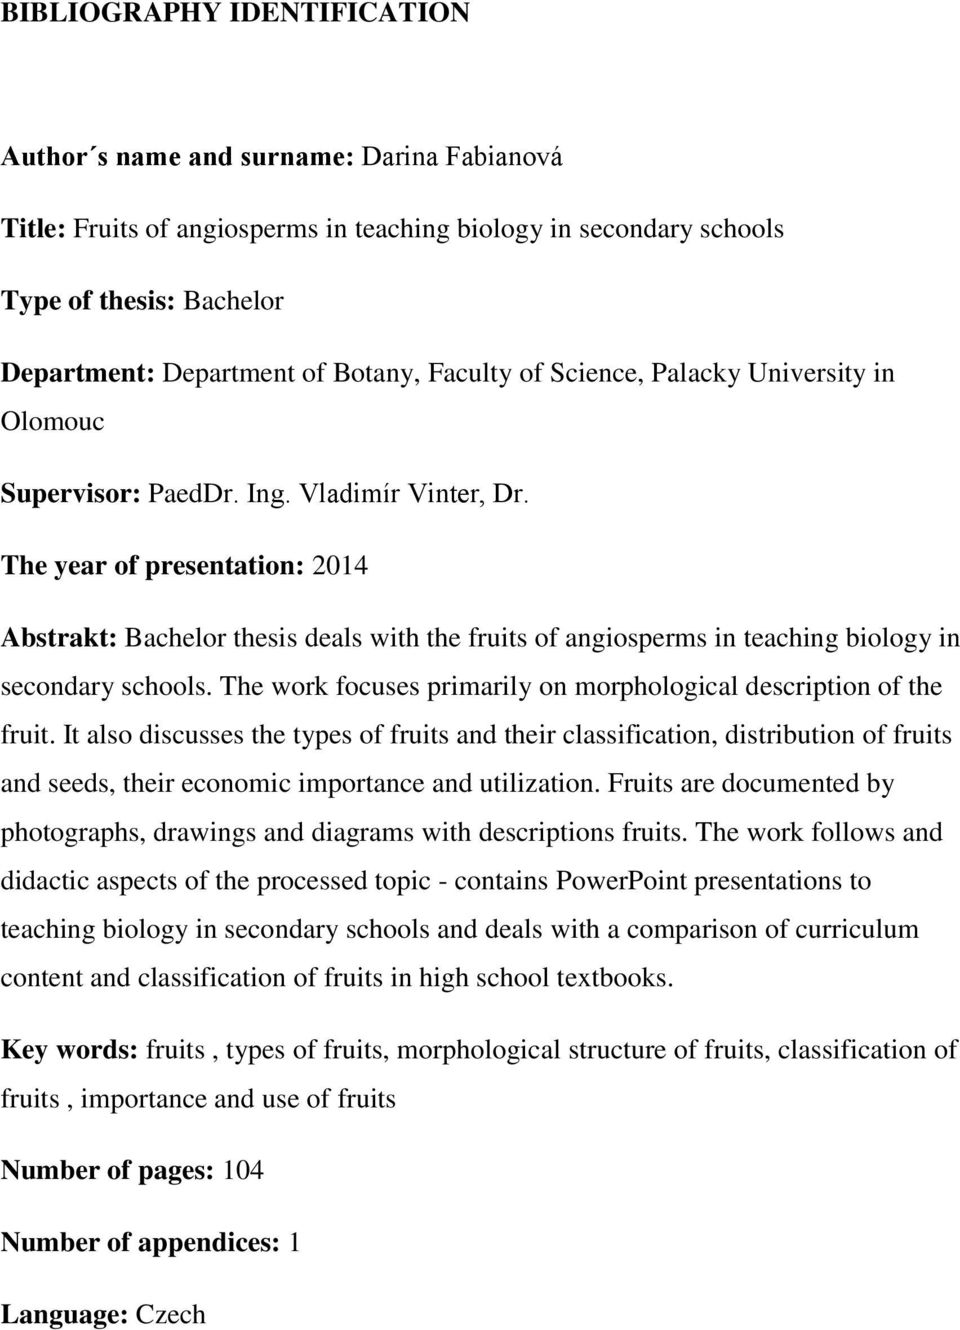 The year of presentation: 2014 Abstrakt: Bachelor thesis deals with the fruits of angiosperms in teaching biology in secondary schools.